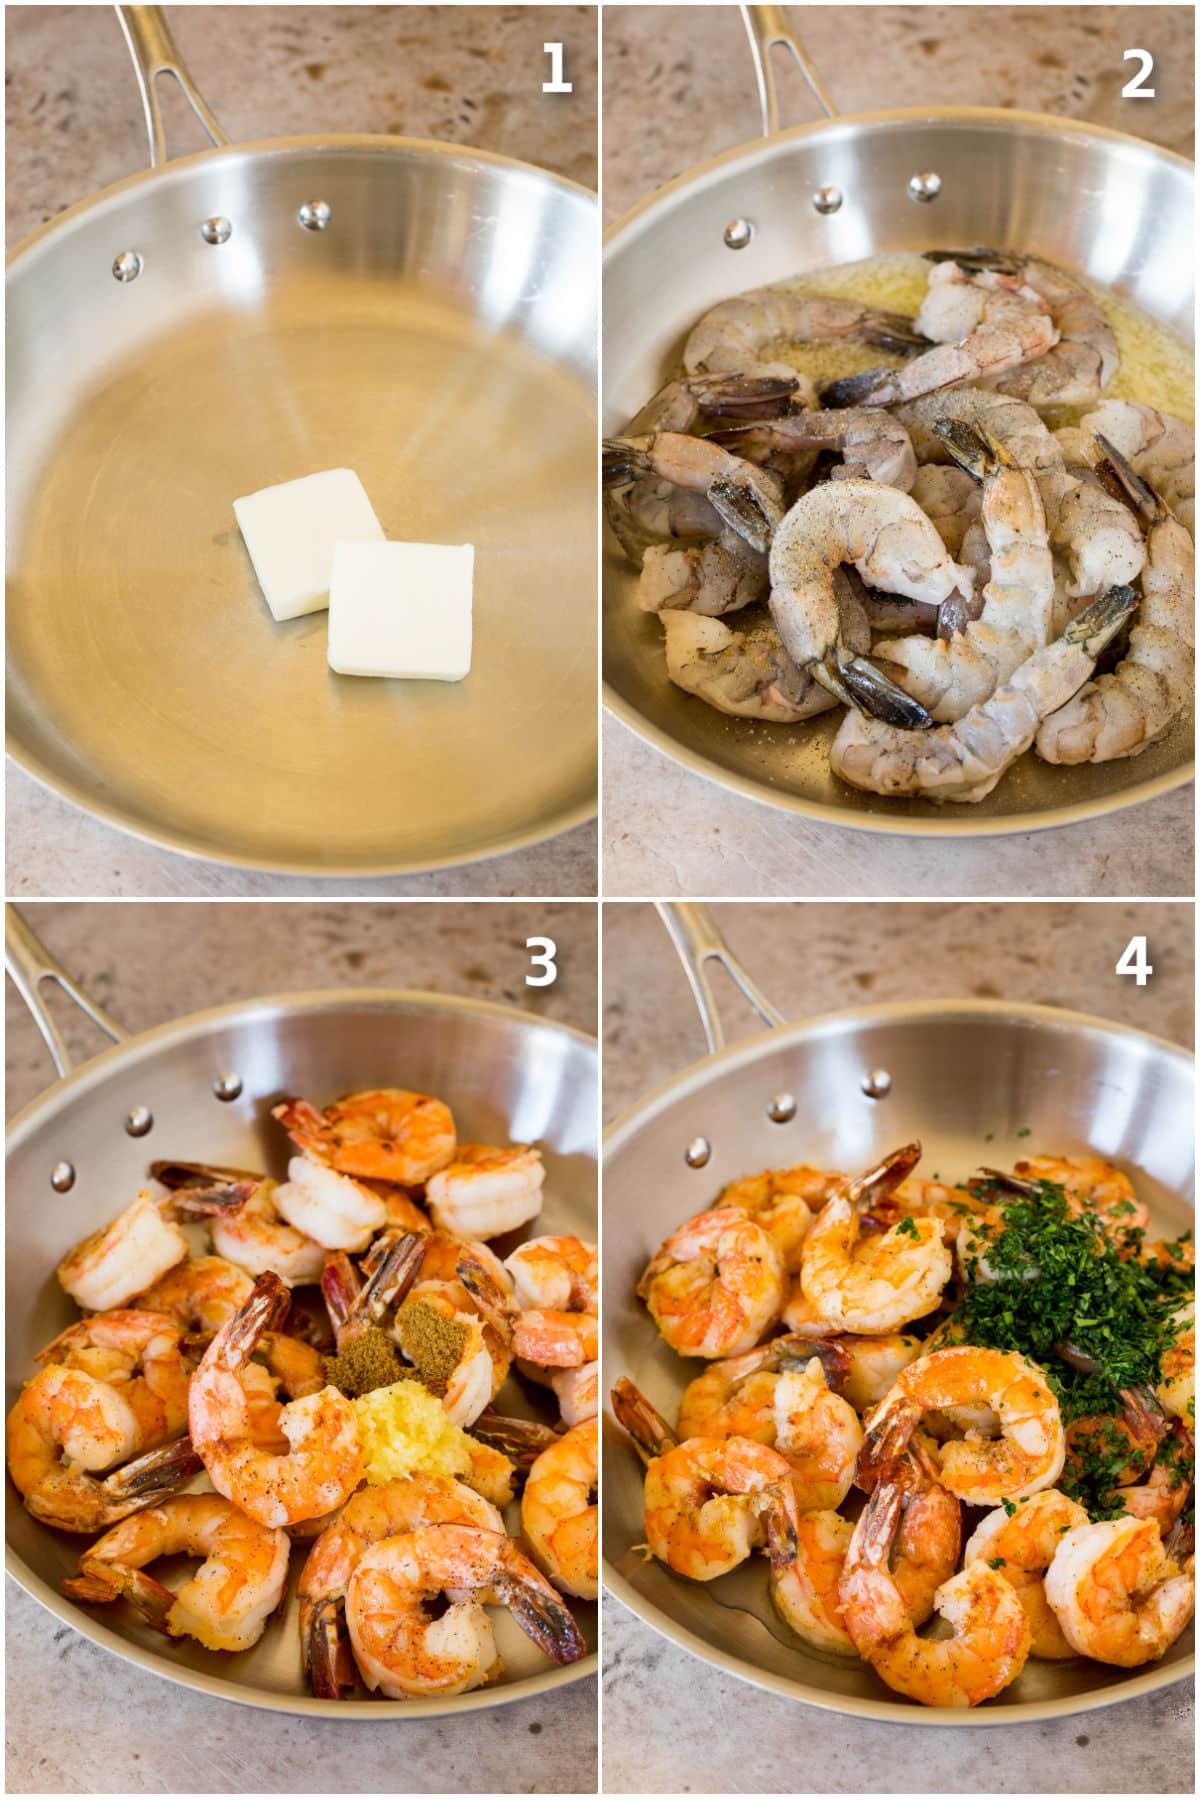 Shrimp being cooked in a pan with garlic, butter and herbs.